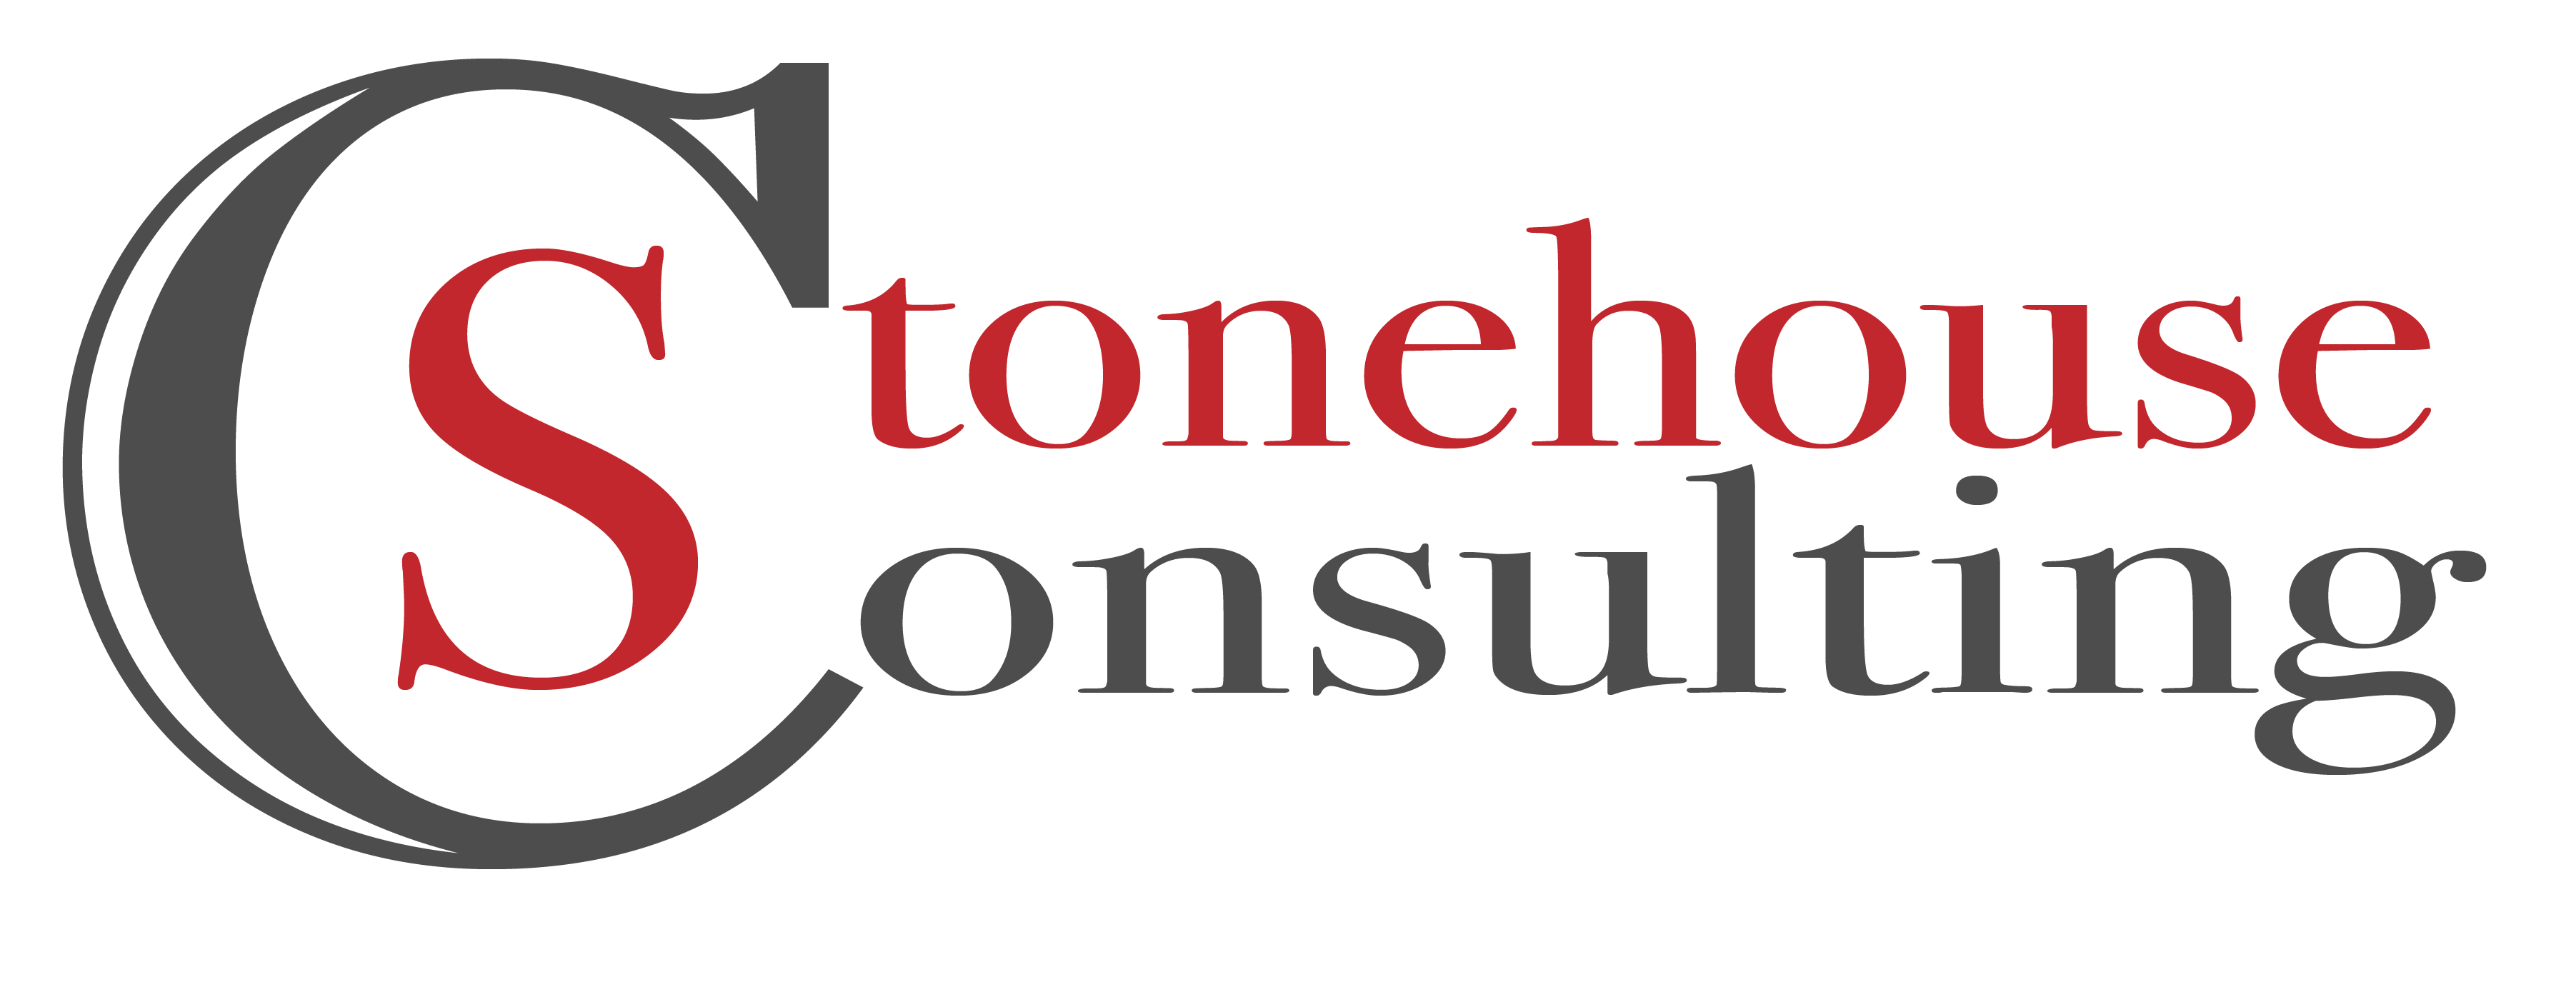 Stonehouse Consulting Group